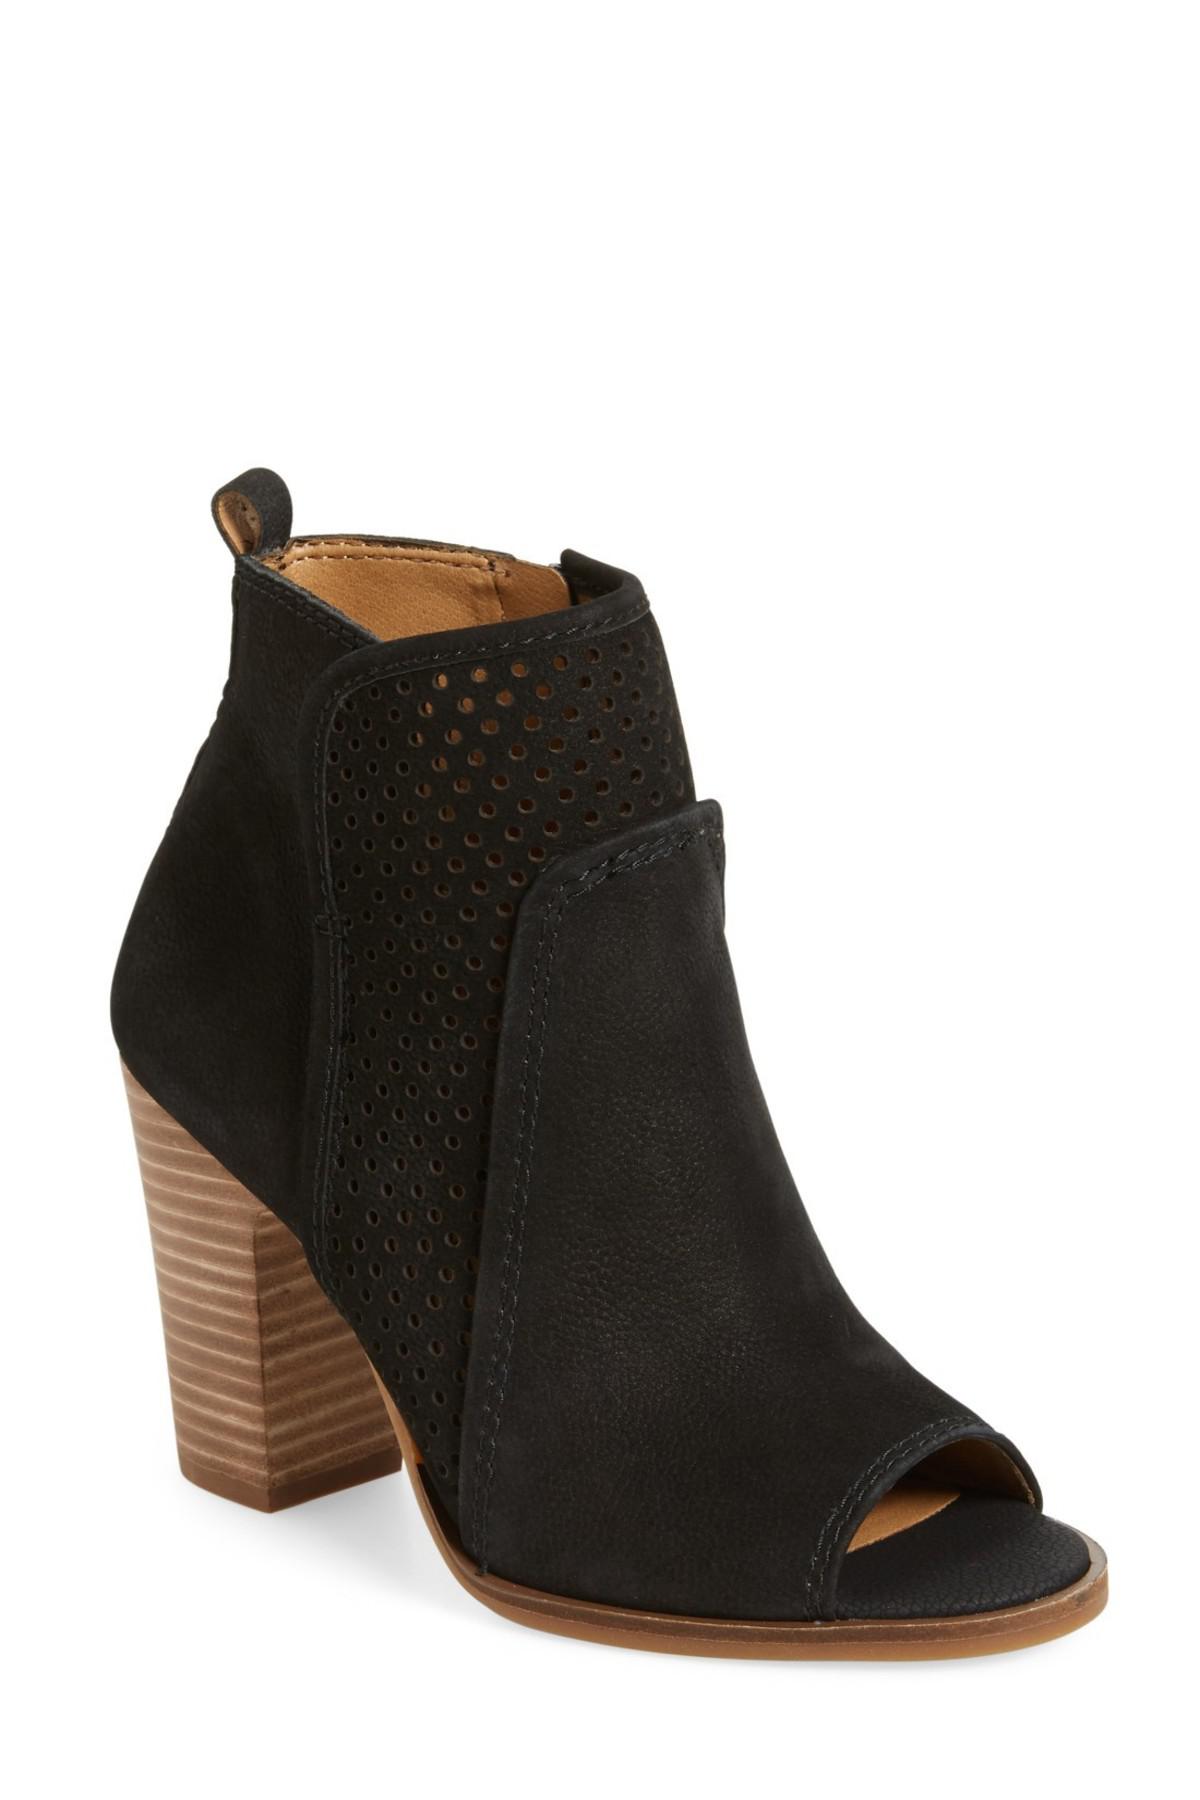 Lyst - Lucky Brand Lakmeh Peep Toe Bootie in Black